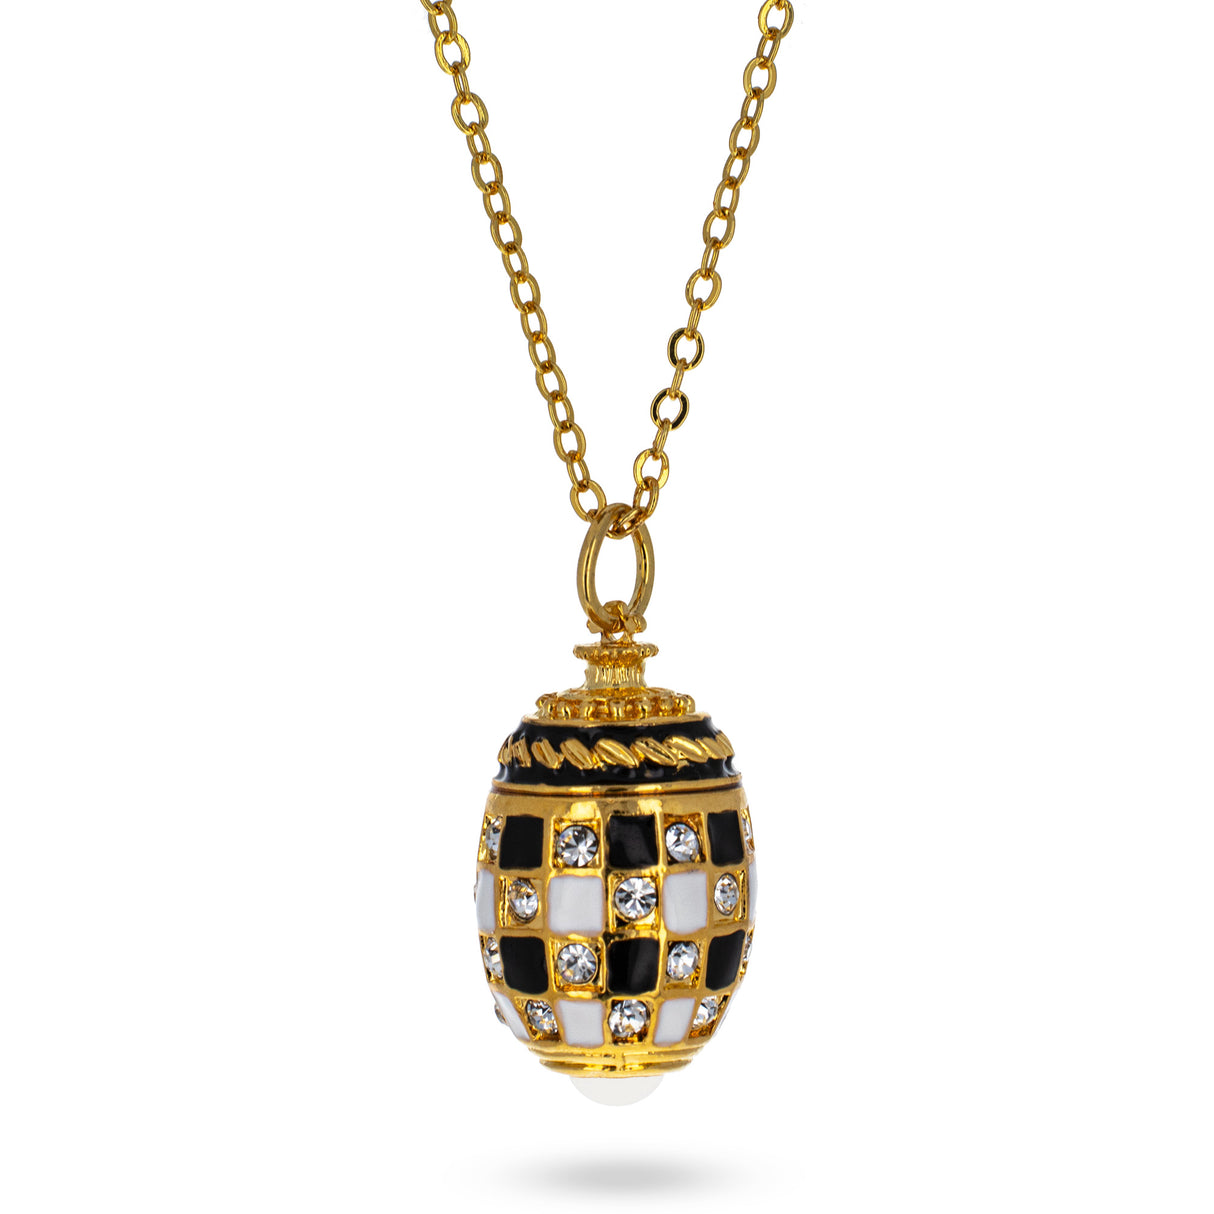 Pewter The Chess Royal Egg Pendant Necklace in Black color Oval